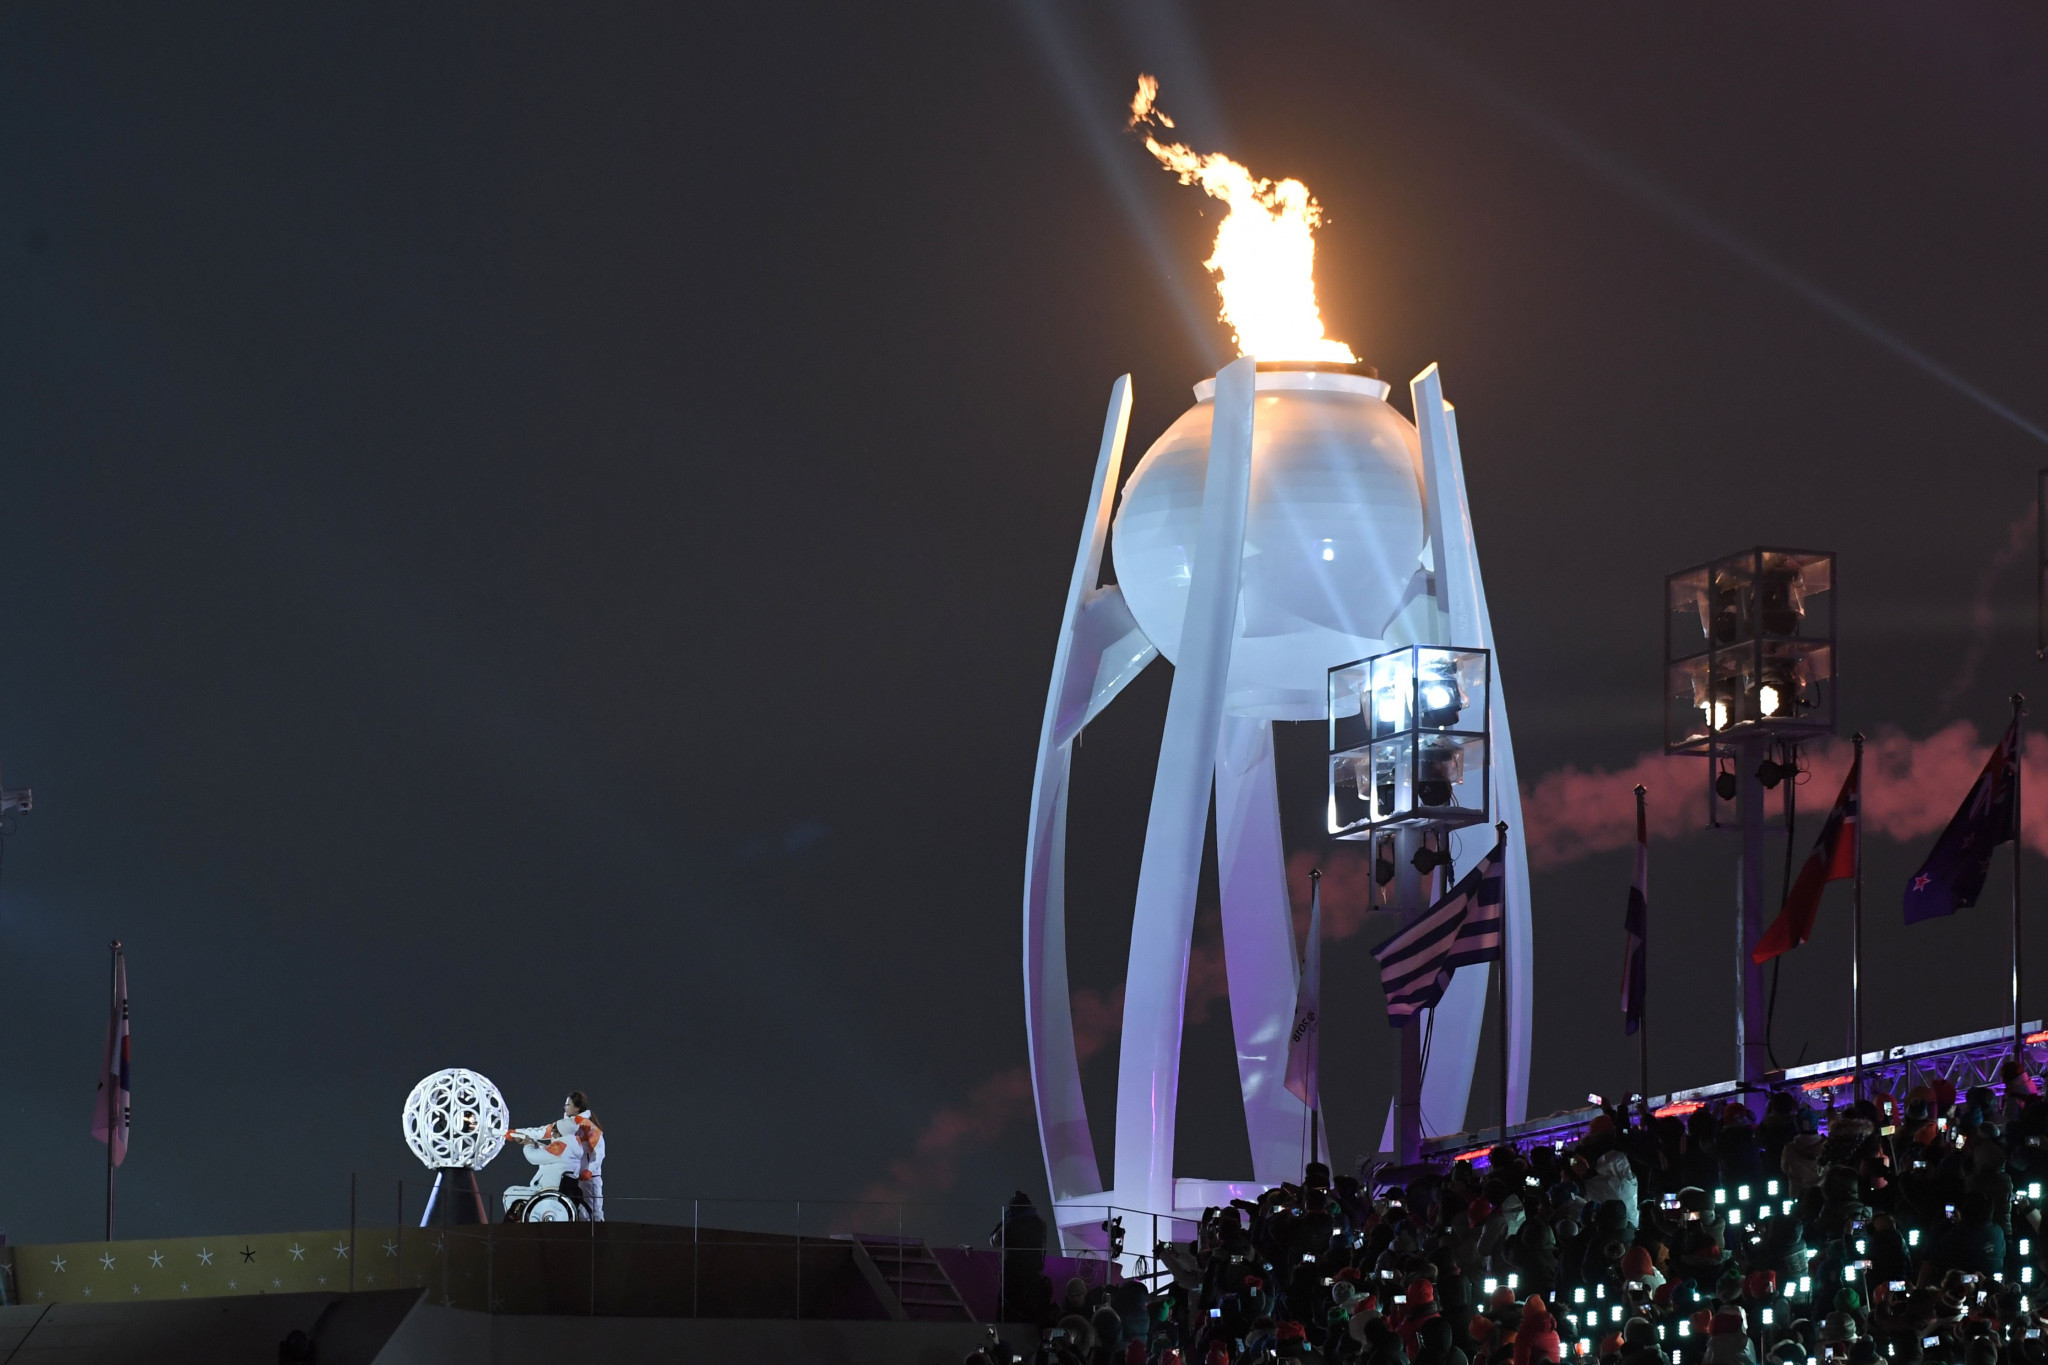 The lighting of the Paralympic Cauldron marked a fitting end to the Opening Ceremony ©Getty Images